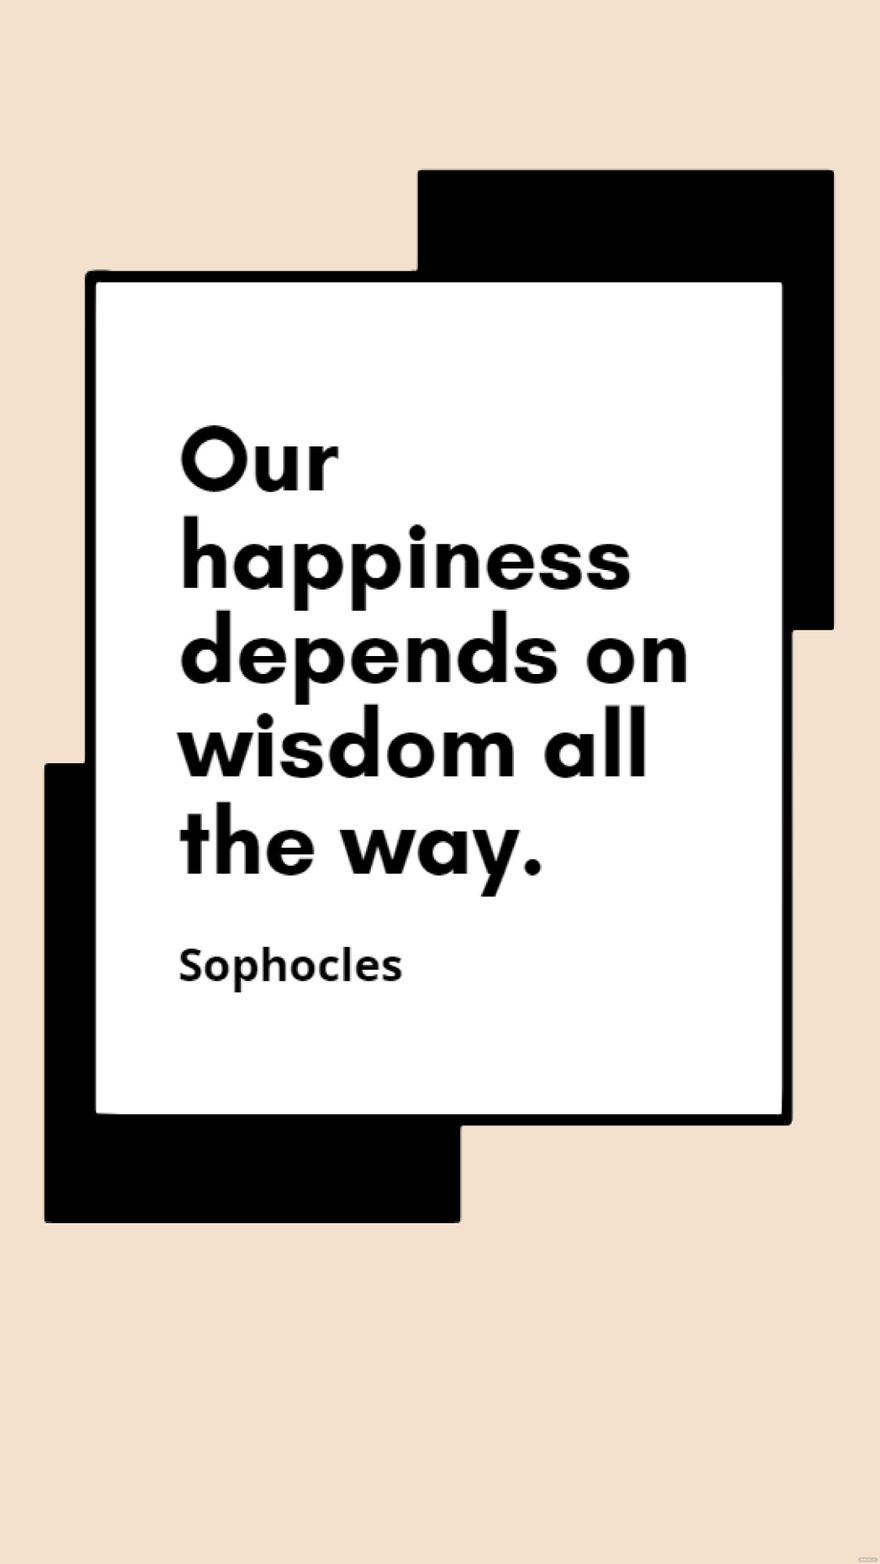 Sophocles - Our happiness depends on wisdom all the way. in JPG